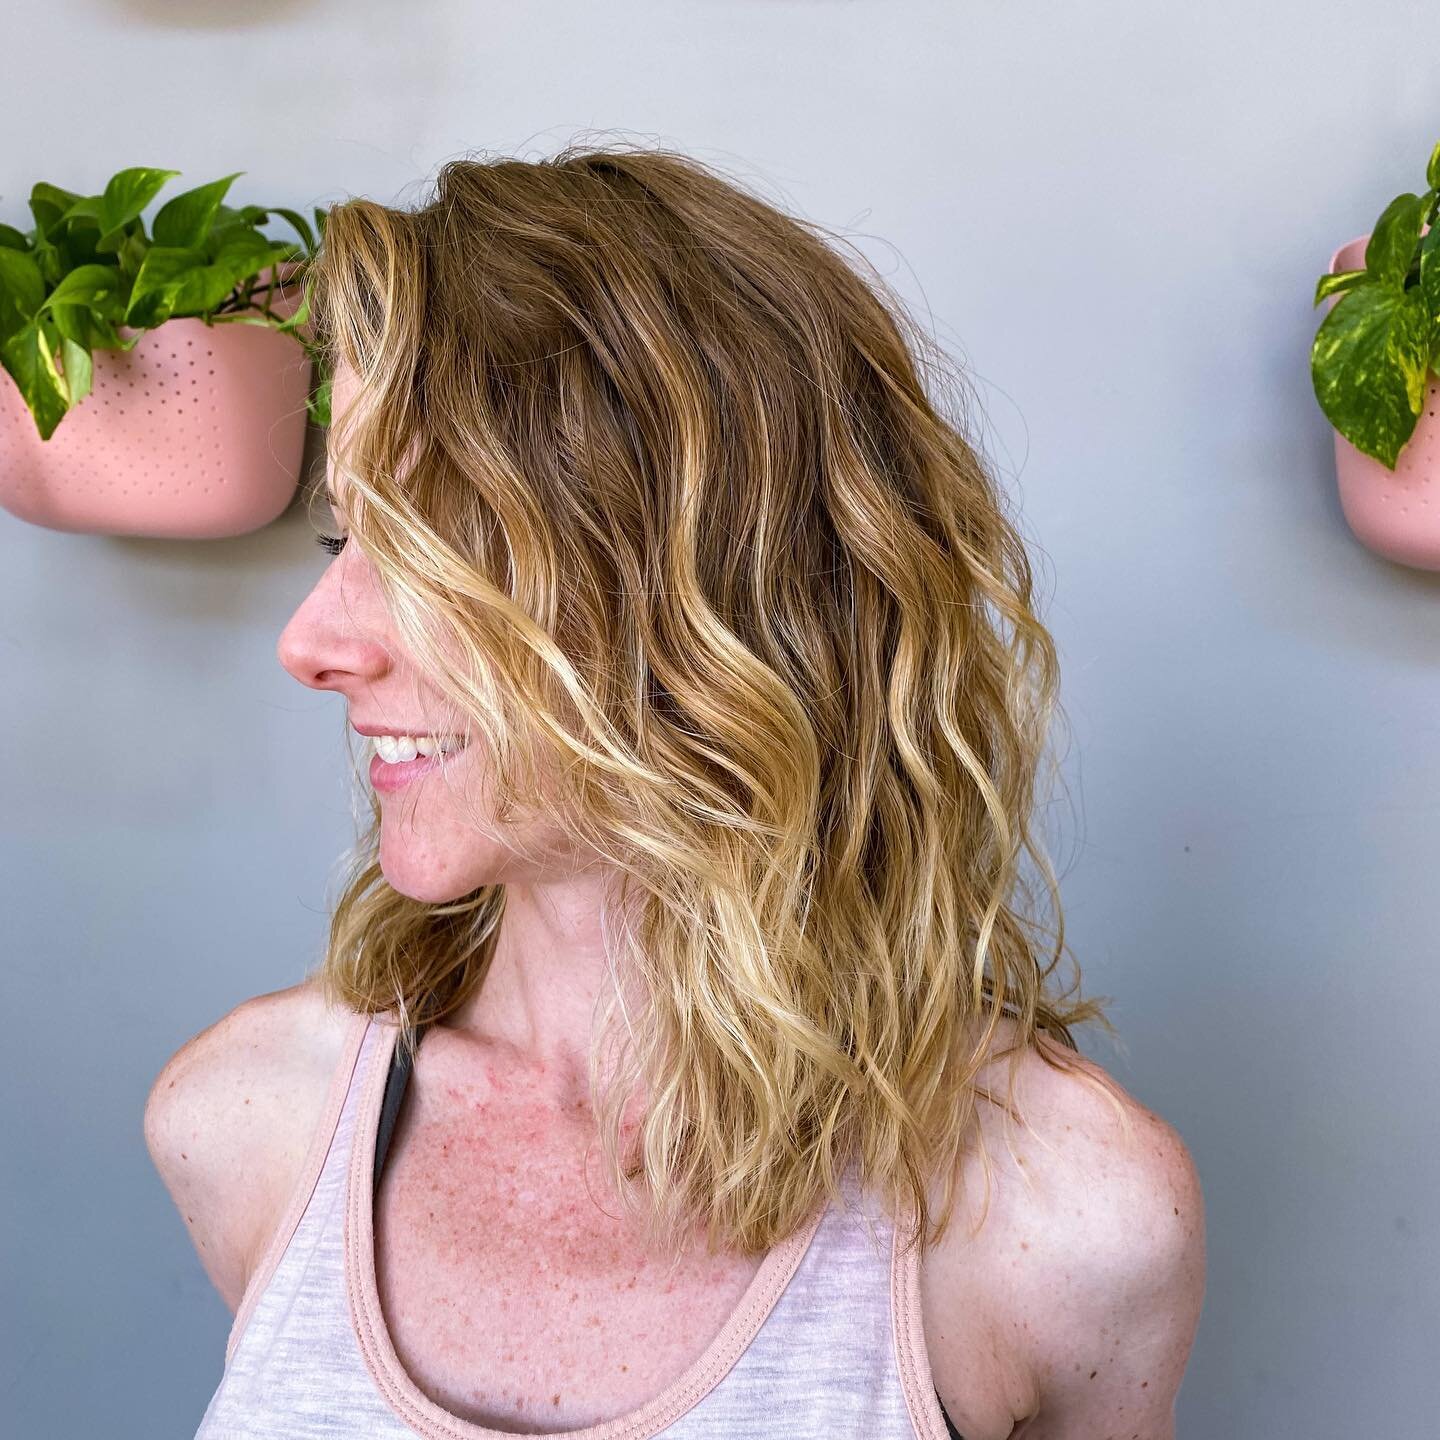 Who&rsquo;s ready for summer? Or at least no more snow! 
☀️ 
This fresh cut @prettywithperla did in the crossroads reminds us of sand, sun, and the humidity making curls and waves live their best natural life. 
☀️
Swipe for the before and after of th